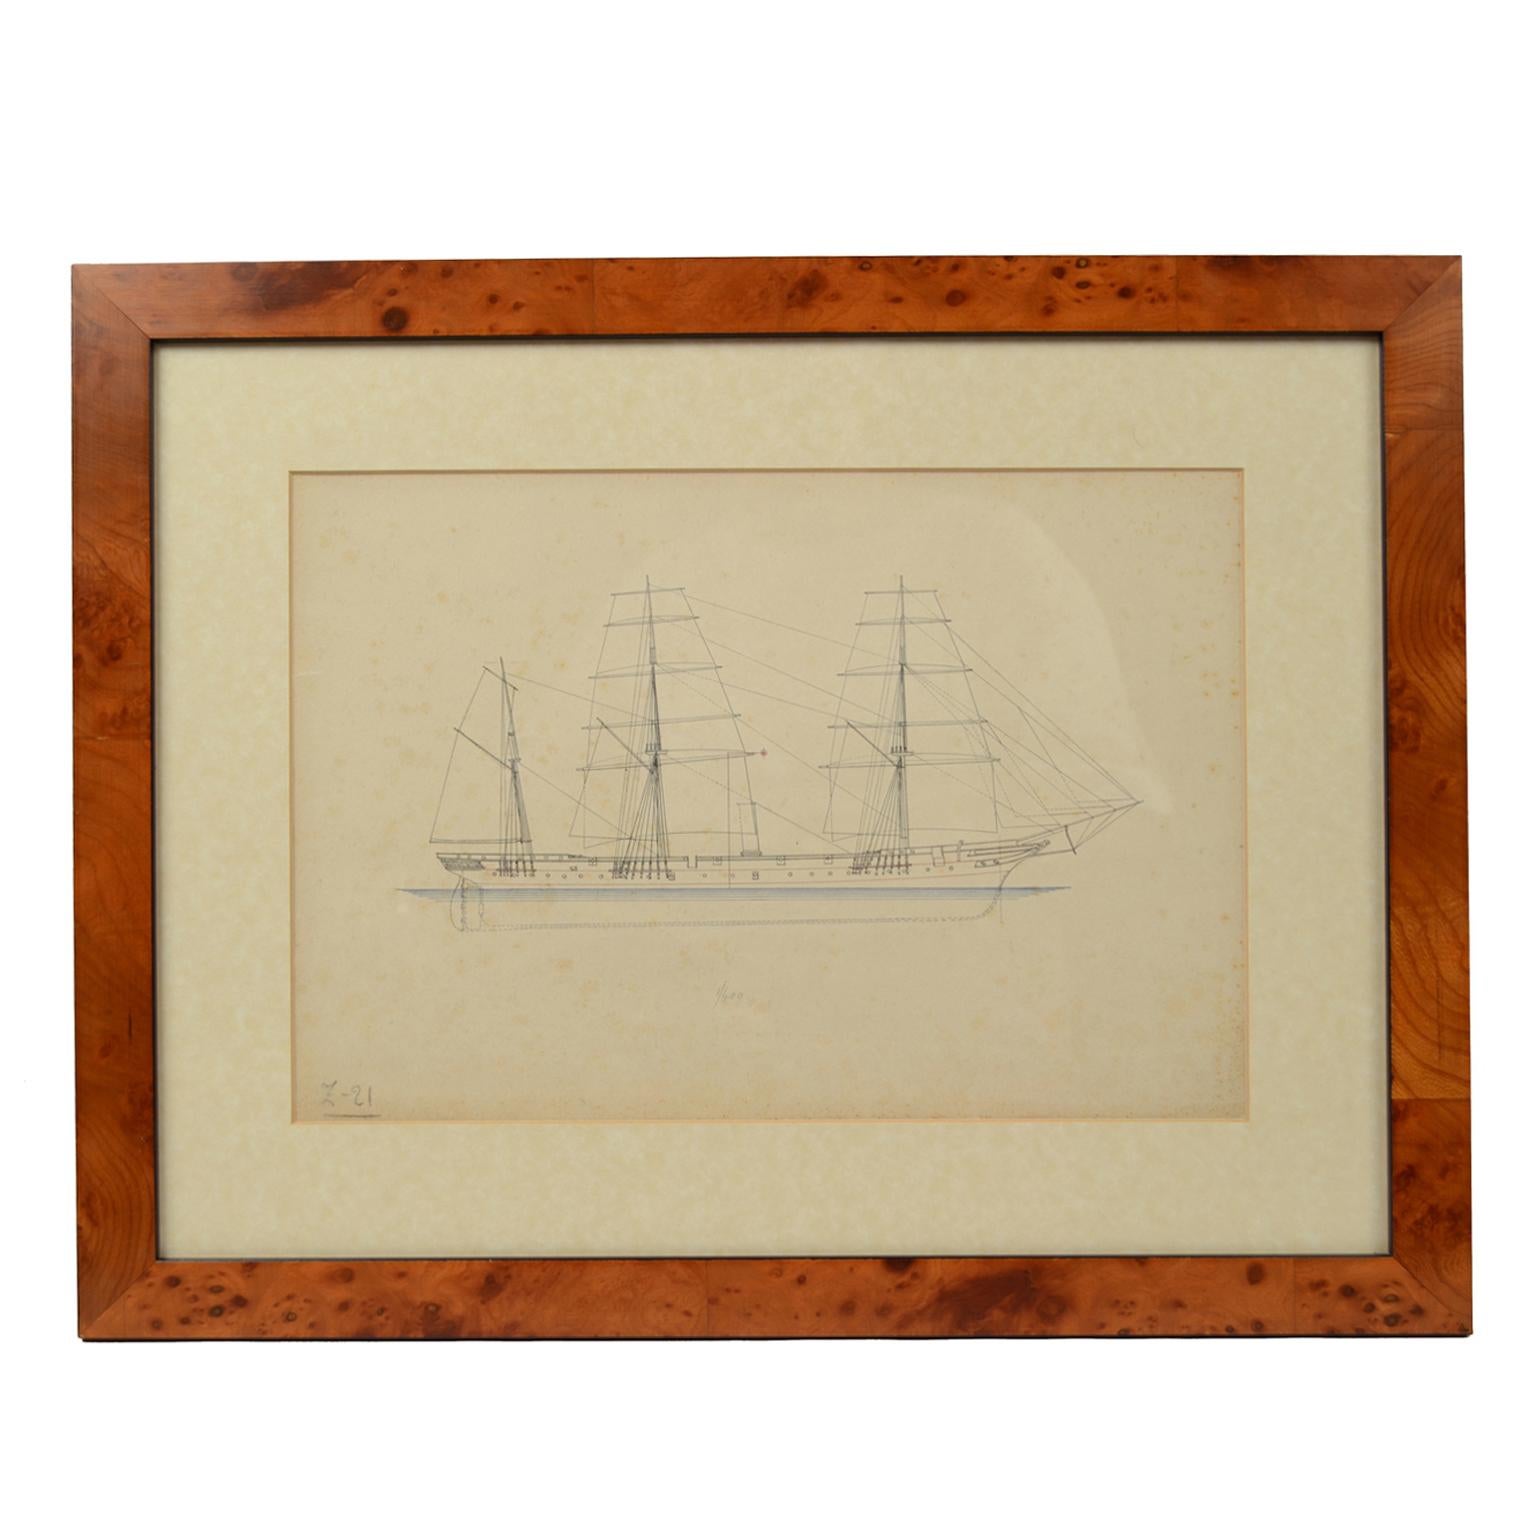 Print no. 1 of 400 Depicting a Nautical Schooner Made in the Mid-19th Century For Sale